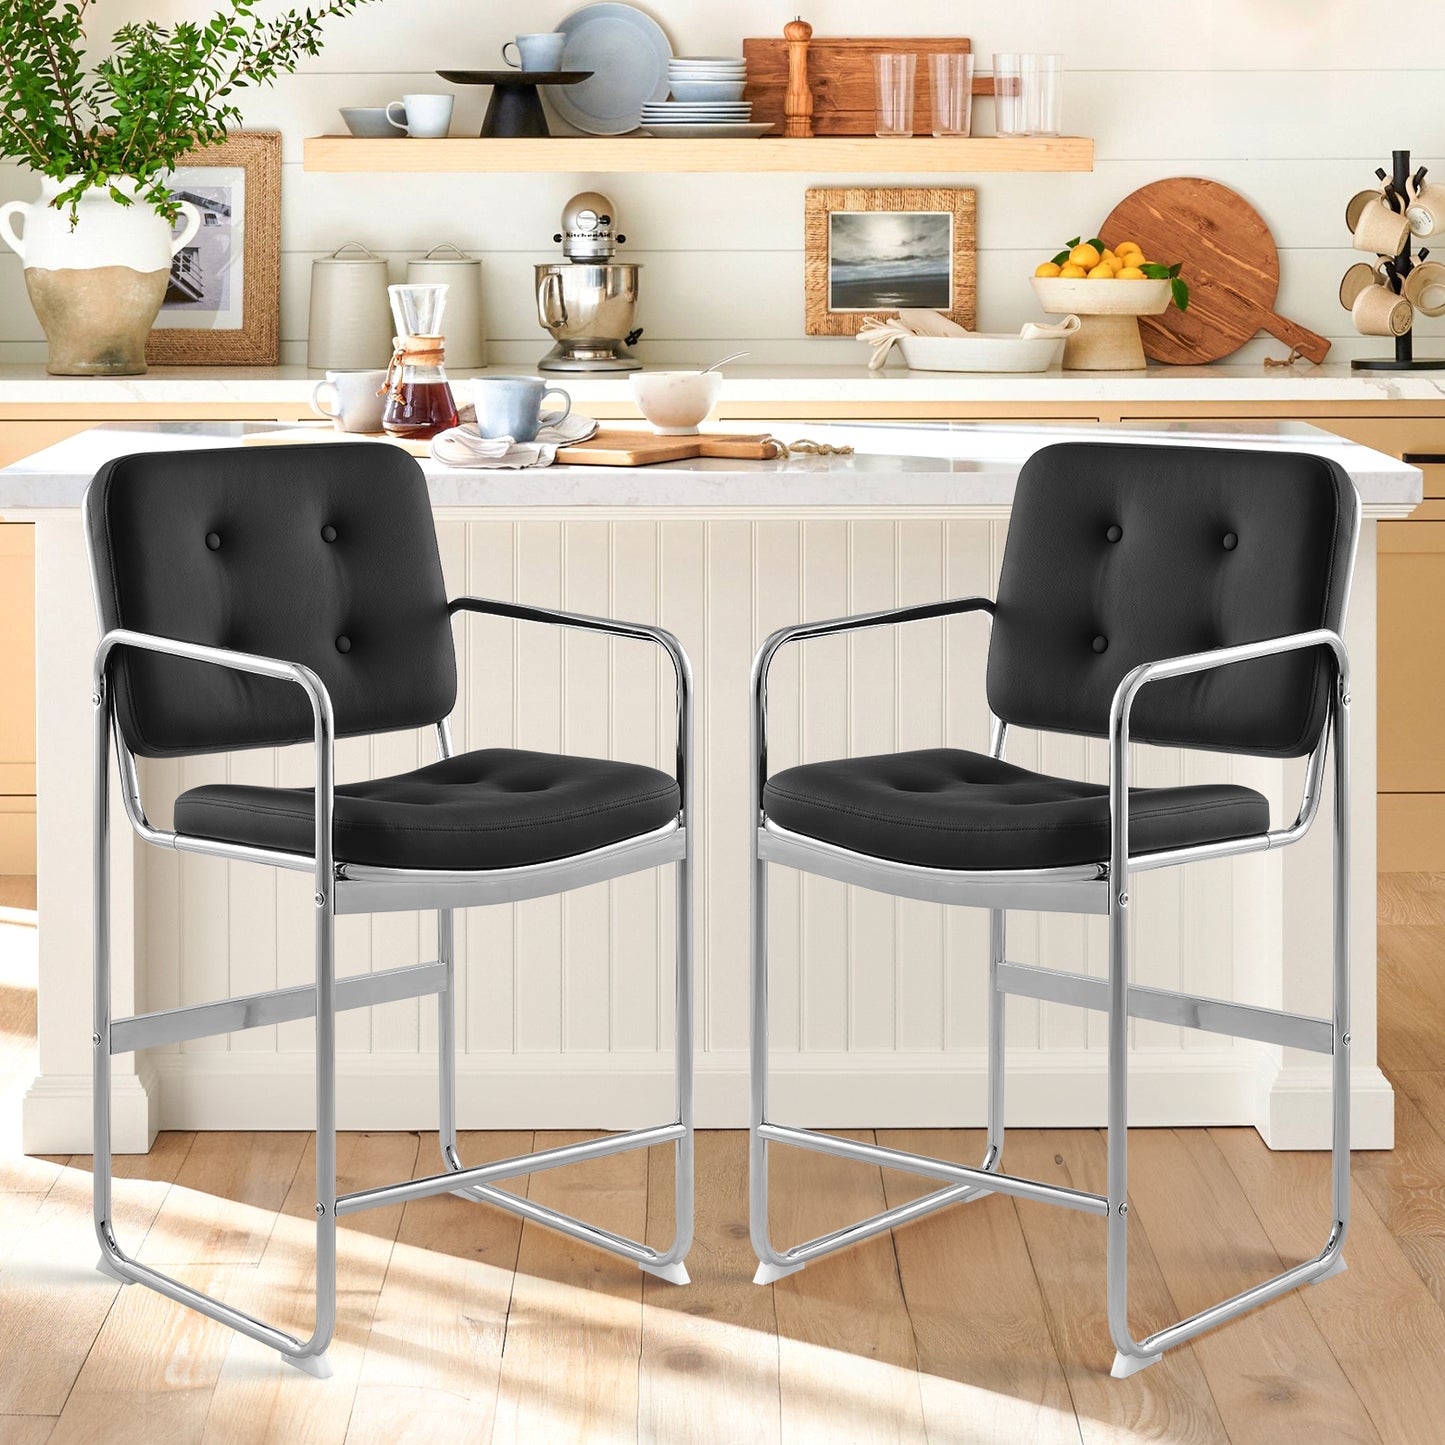 COLAMY PU Leather Counter Height Barstool Button Tufted Upholstered Bar Stools